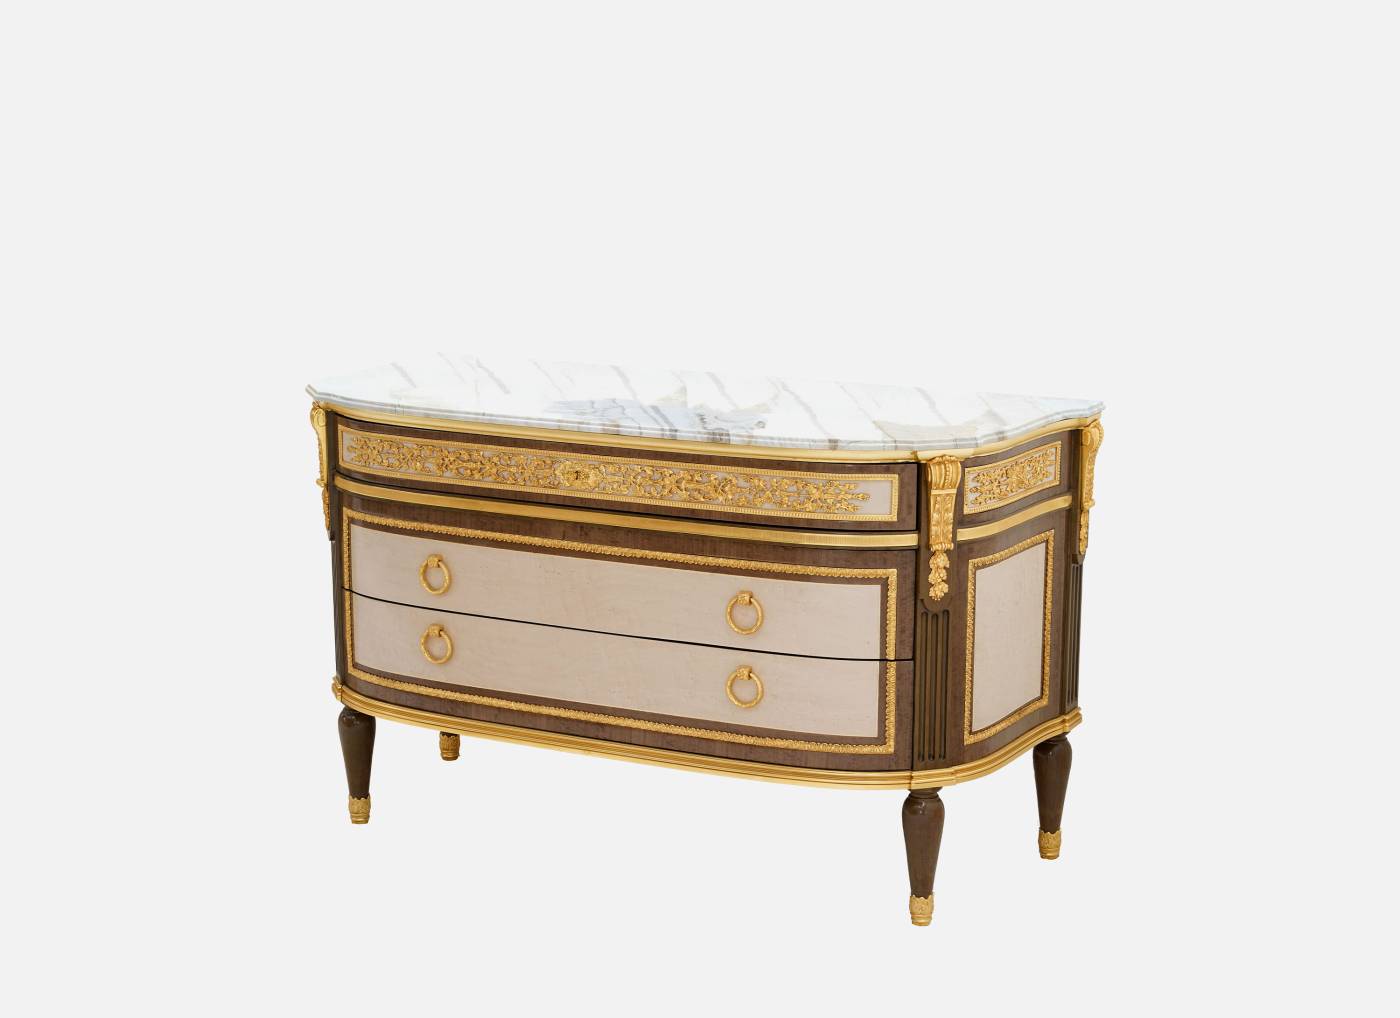 ART. 796-2 – Discover the elegance of luxury classic Chest of drawers made in Italy by C.G. Capelletti. Luxury classic furniture that combines style and craftsmanship.